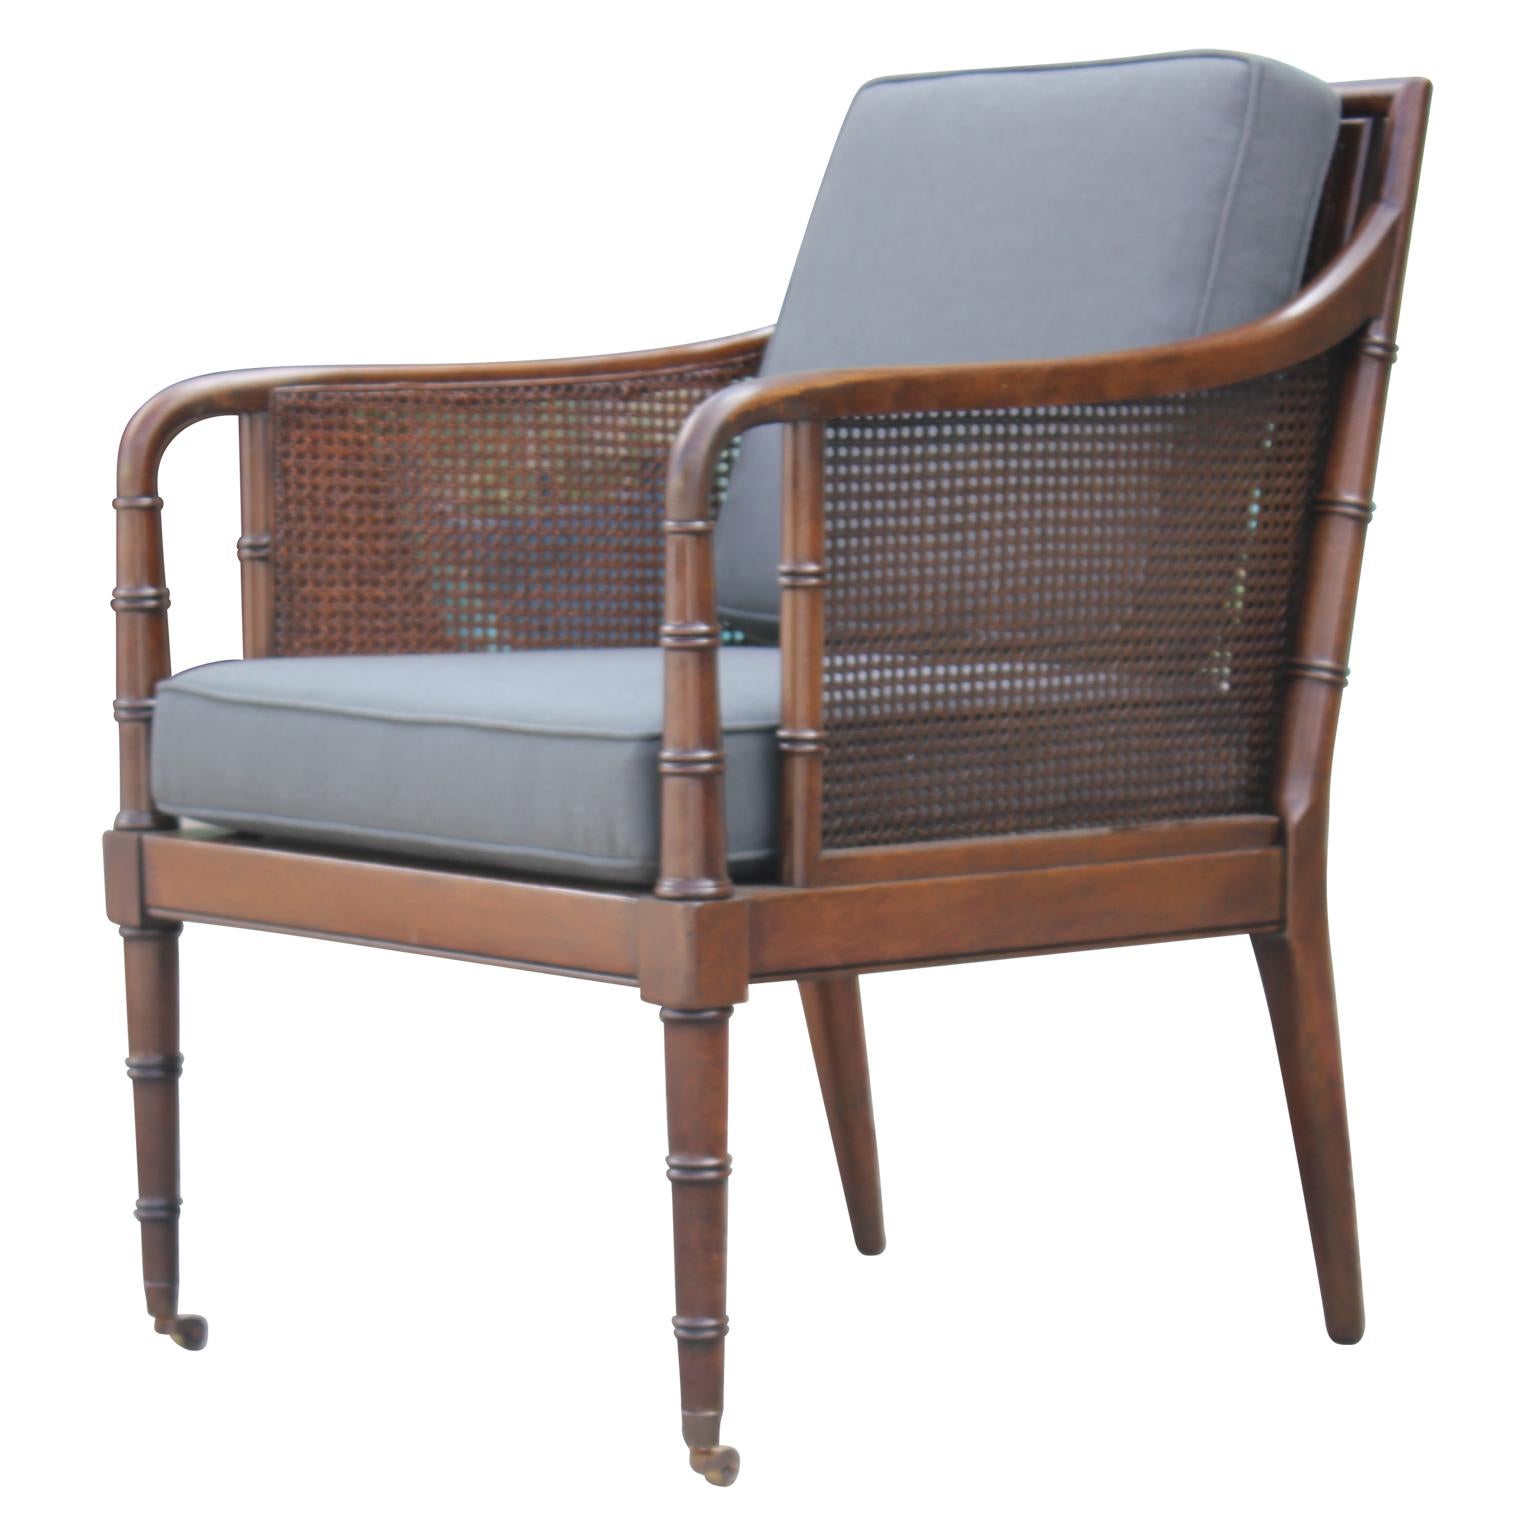 Mid-20th Century Pair of Modern Baker Furniture Faux Bamboo and Cane Grey Linen Lounge Chairs